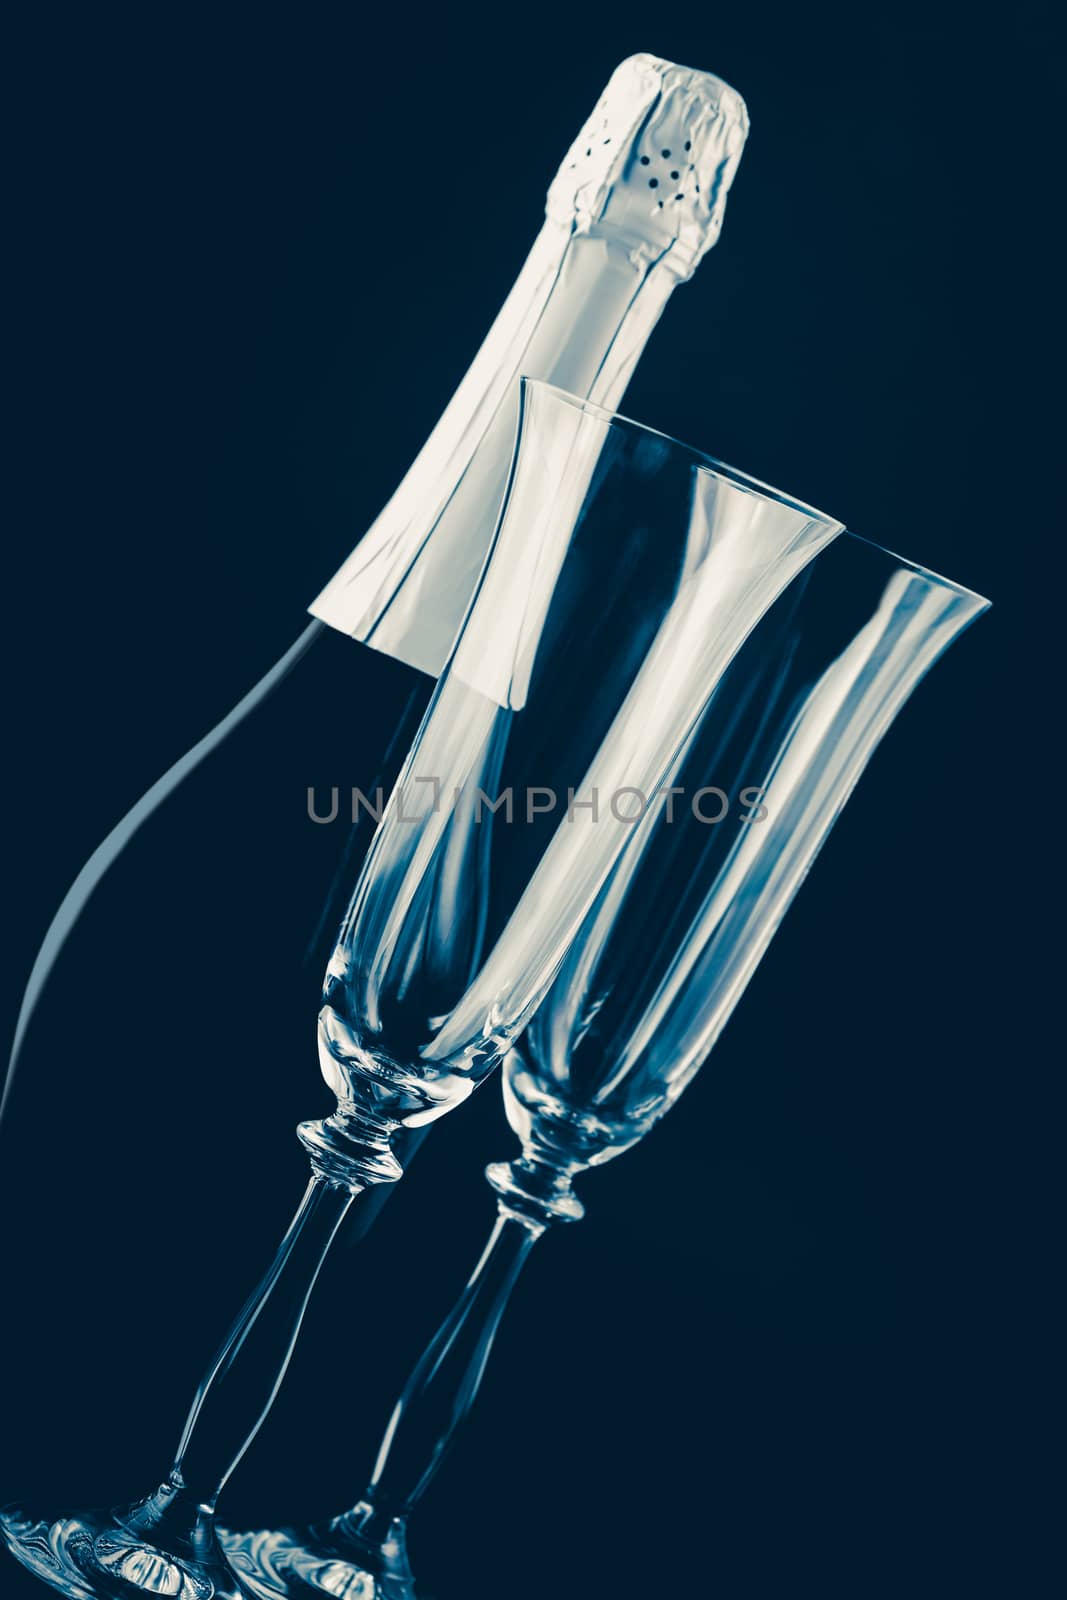 bottle of champagne and glasses on a dark background